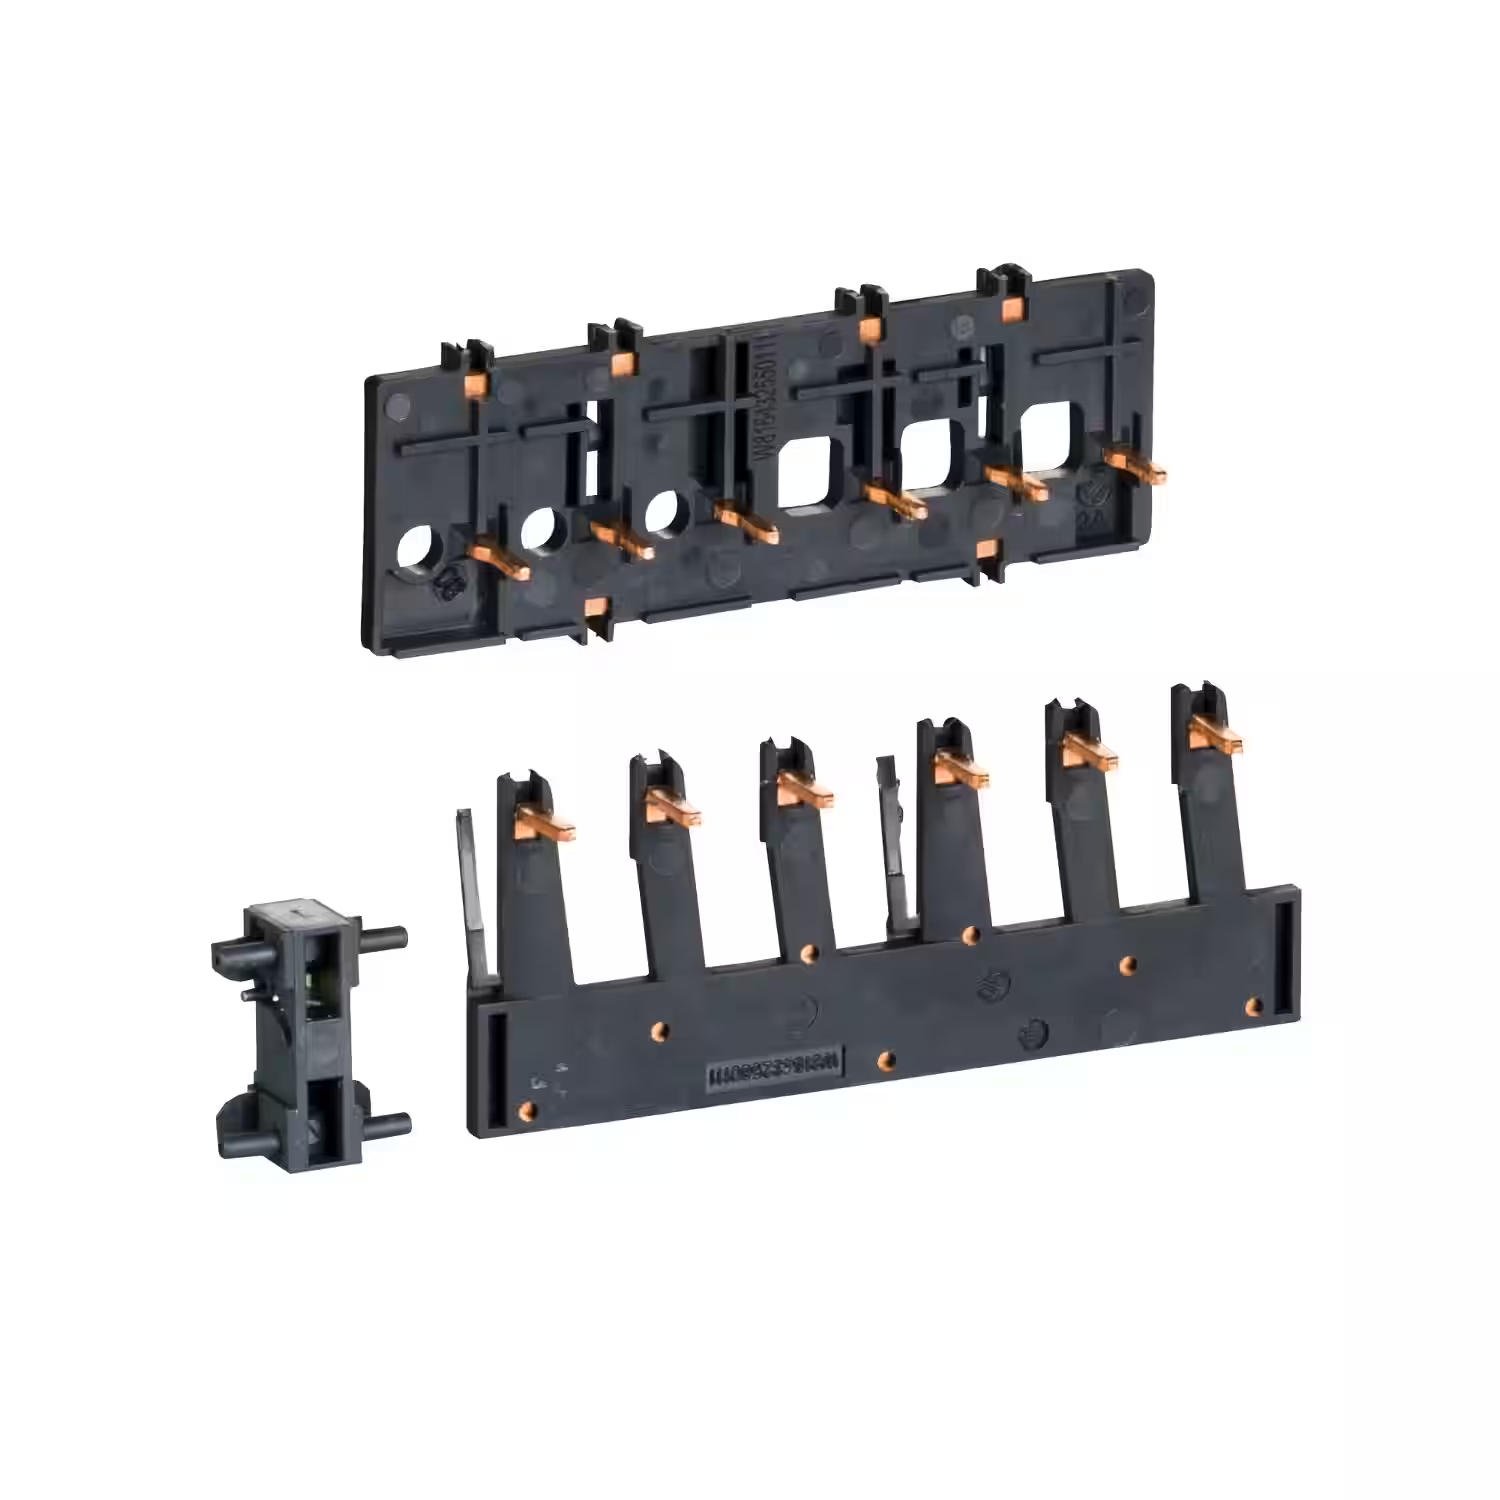 Link for parallel connection of 3 poles, for TeSys Deca contactors LC1D09-D38.